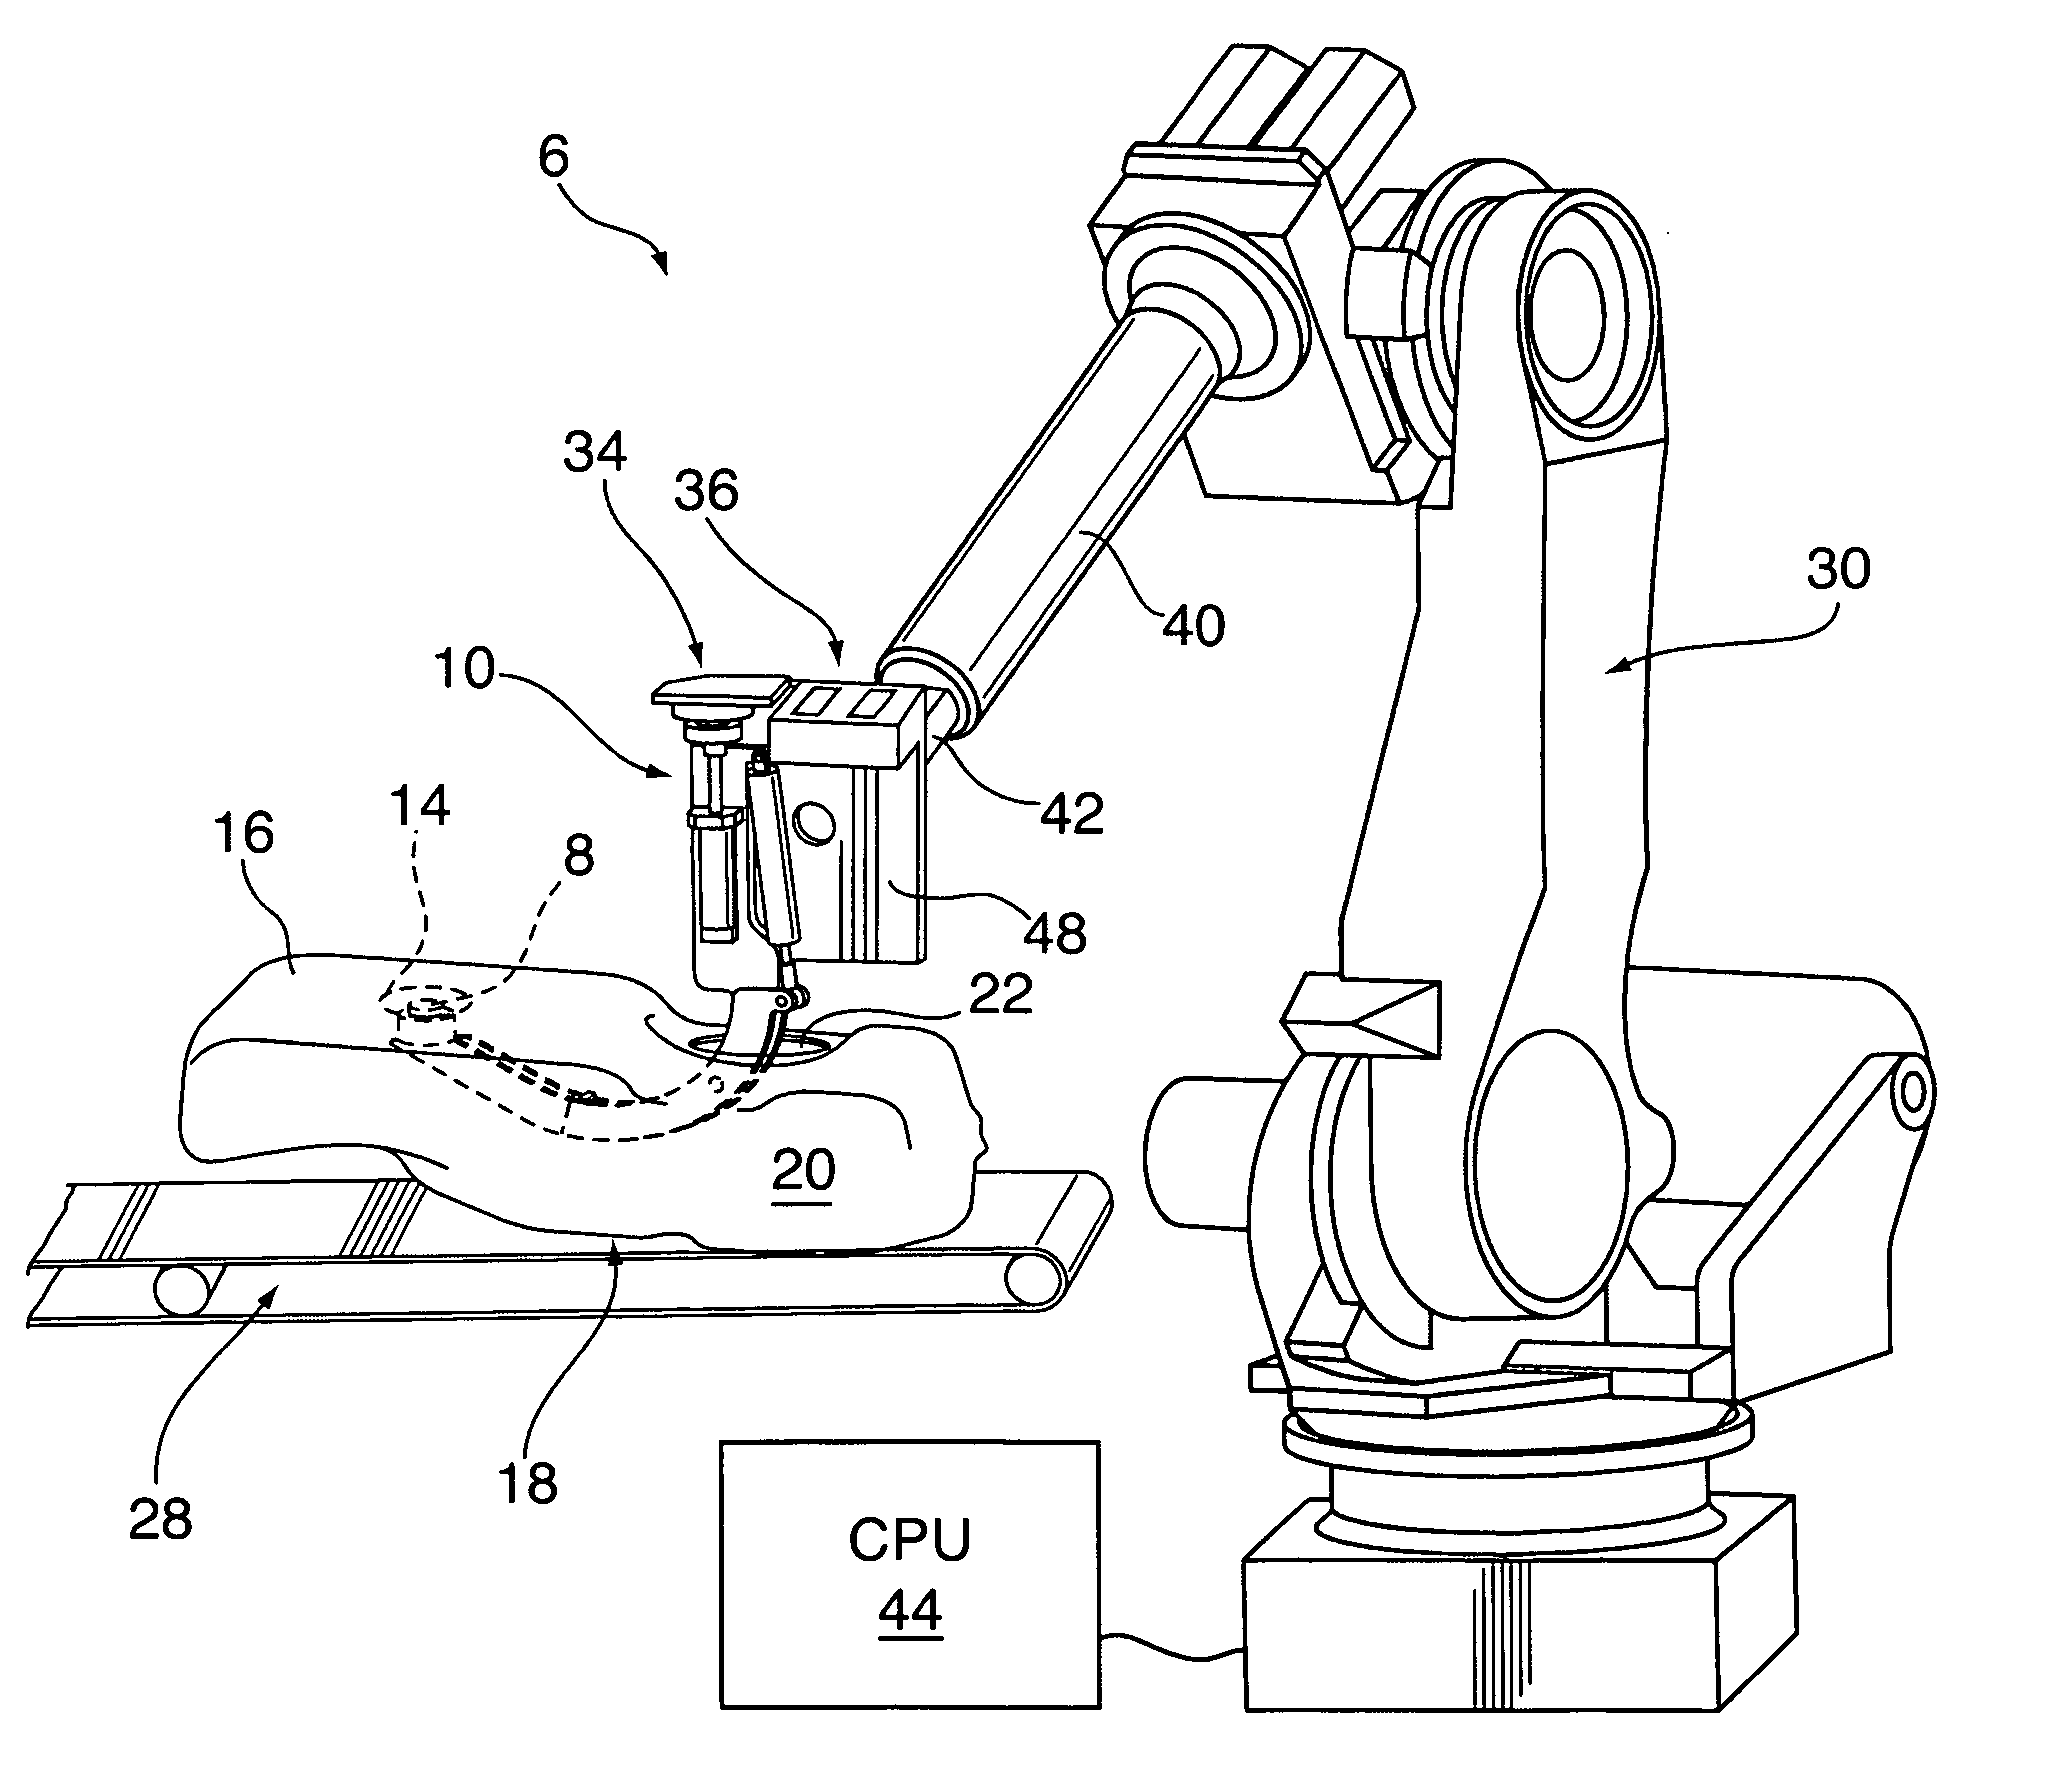 Coupling apparatus for positioning components in workpiece interior and method of using same